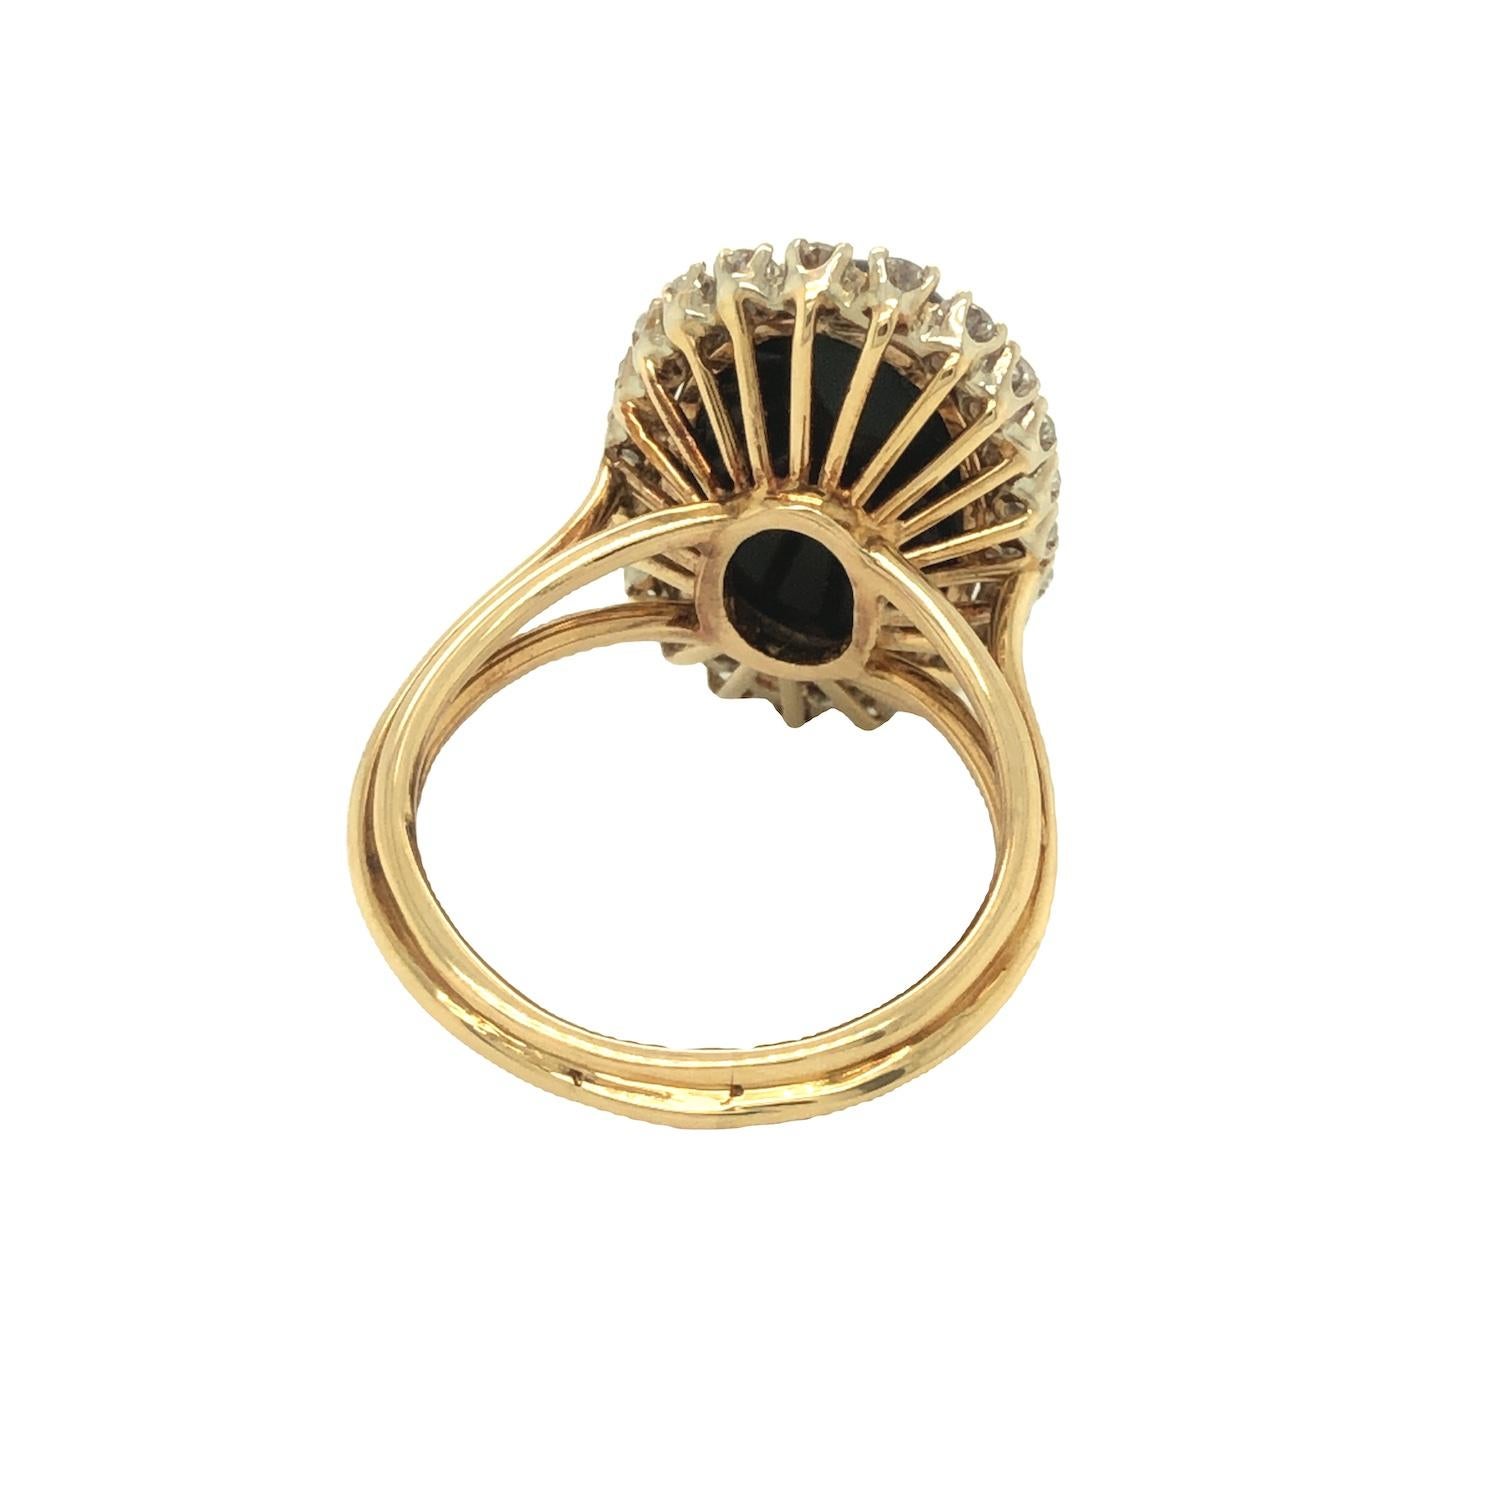 Vintage Cabochon Onyx and Diamond Halo Ring 14K Yellow Gold In Excellent Condition For Sale In beverly hills, CA